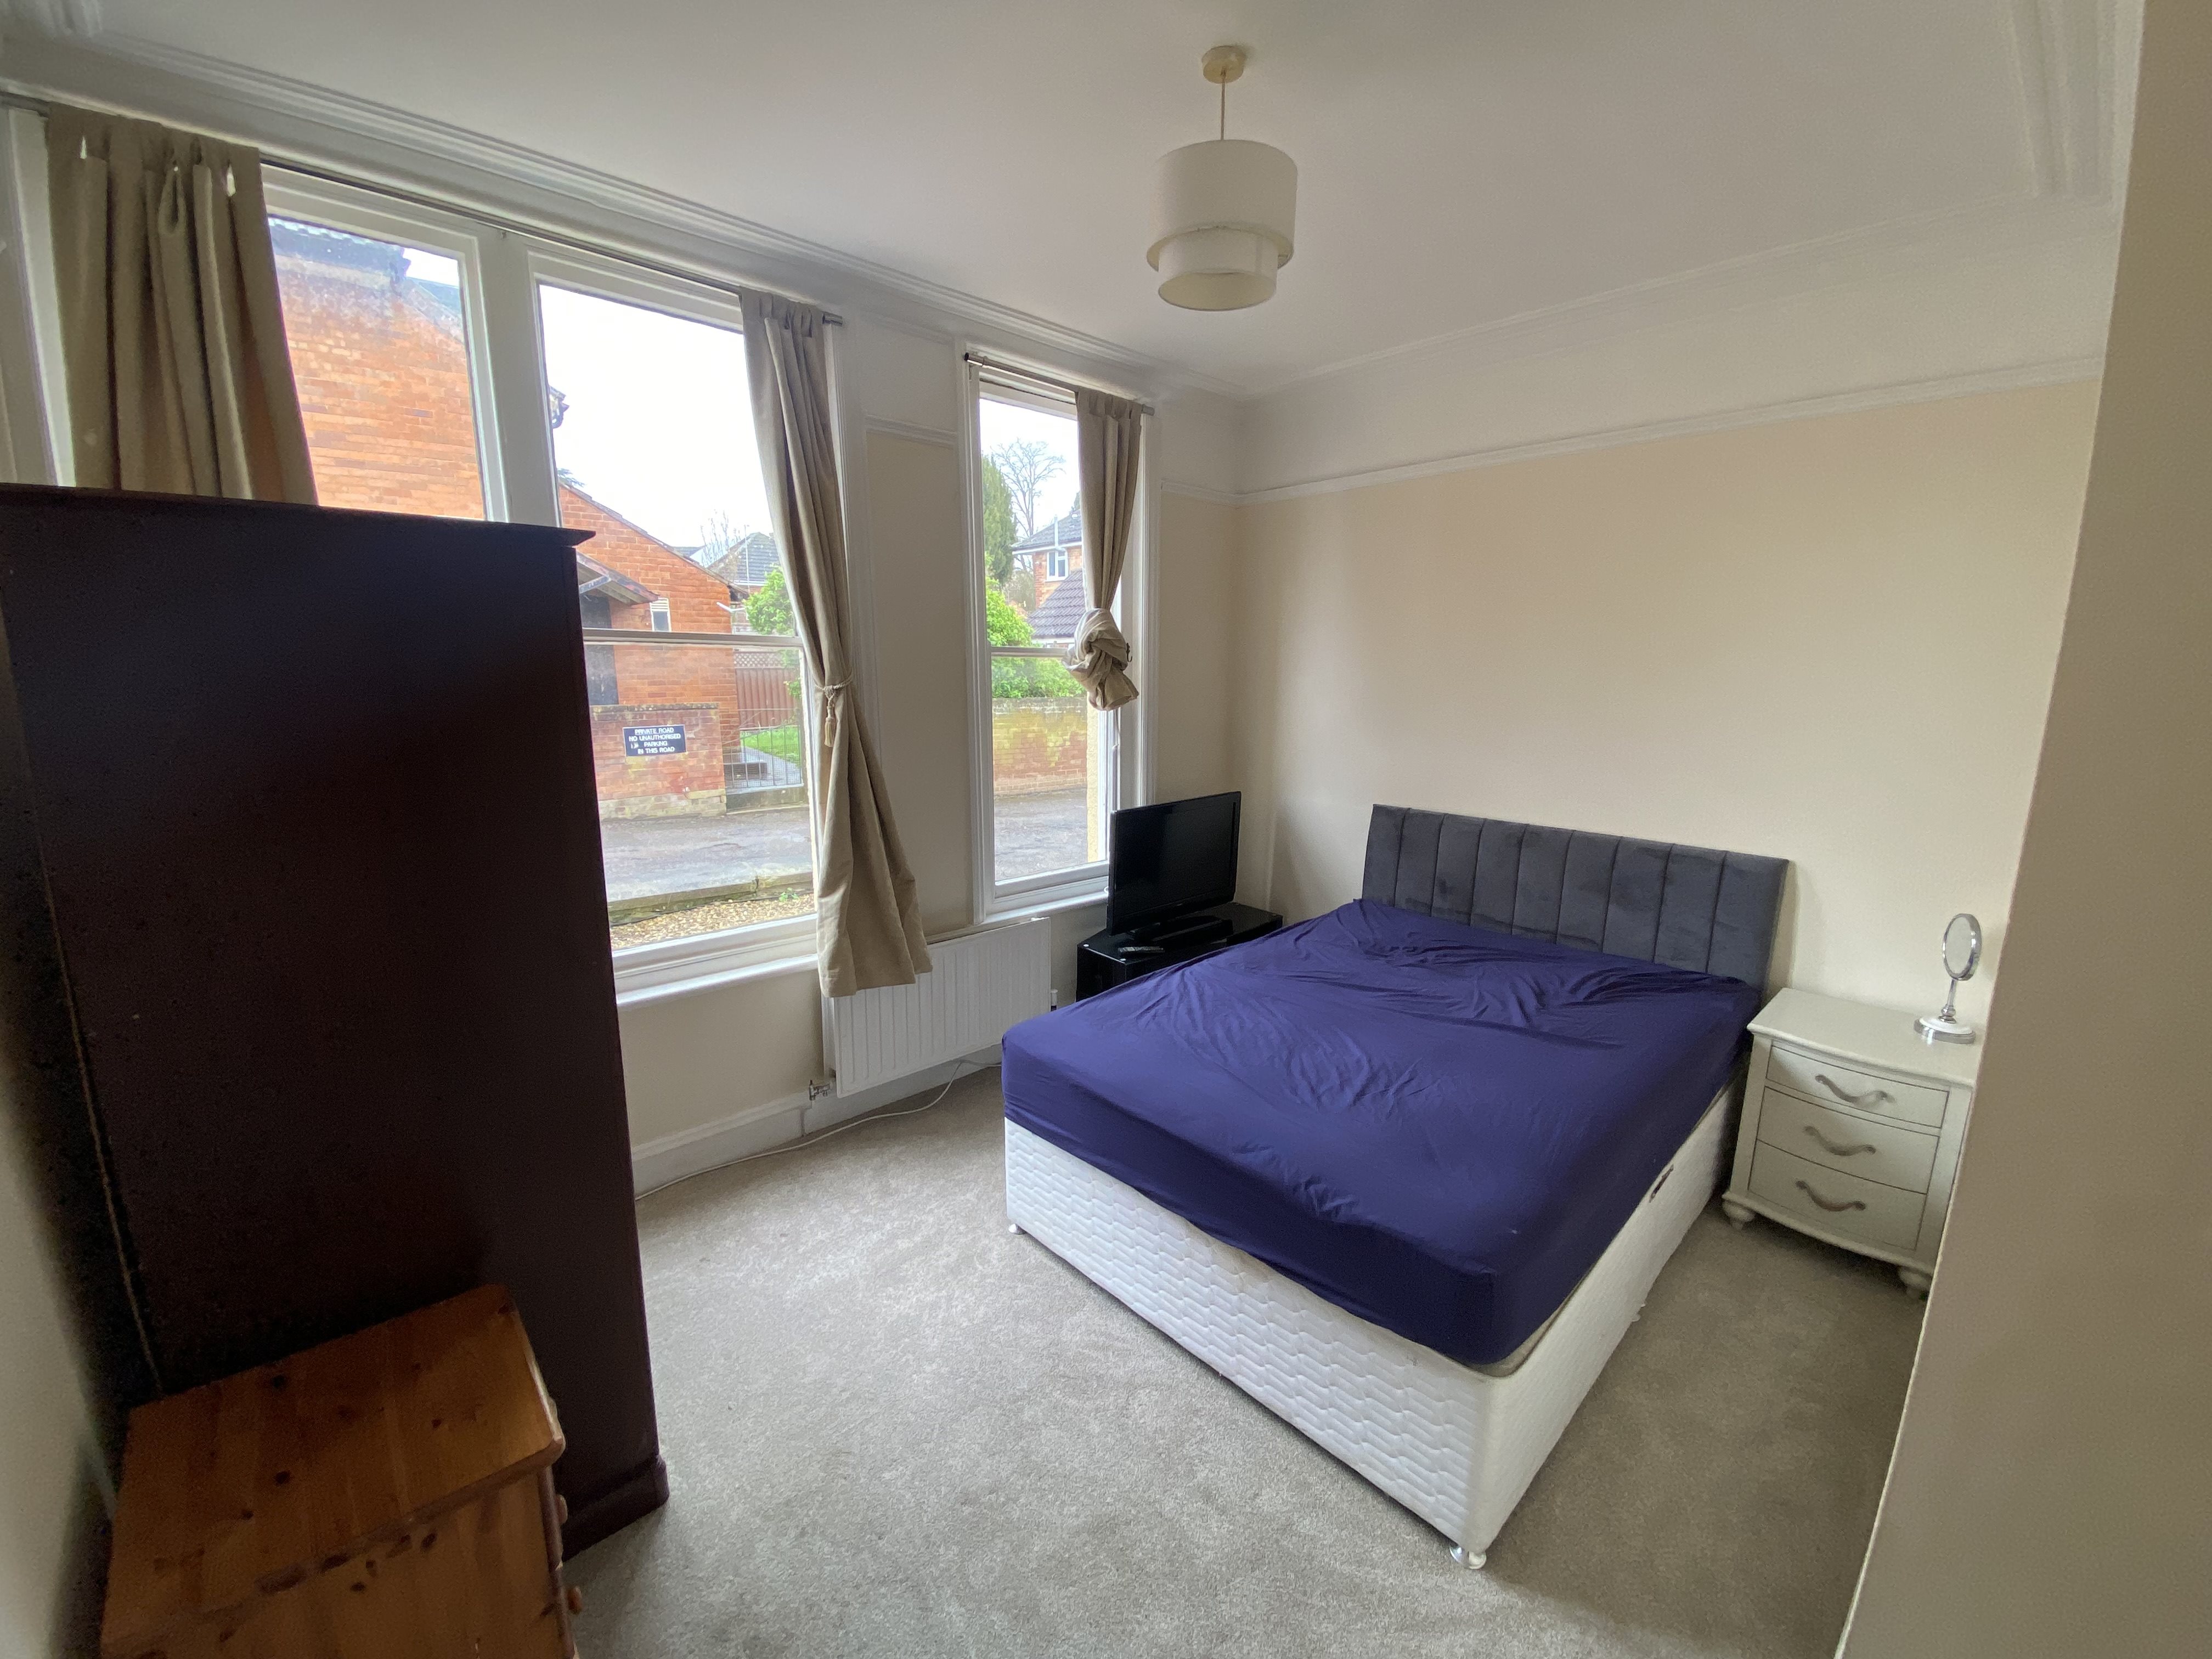 1 bed house / flat share to rent in Belvedere Road, TA1 